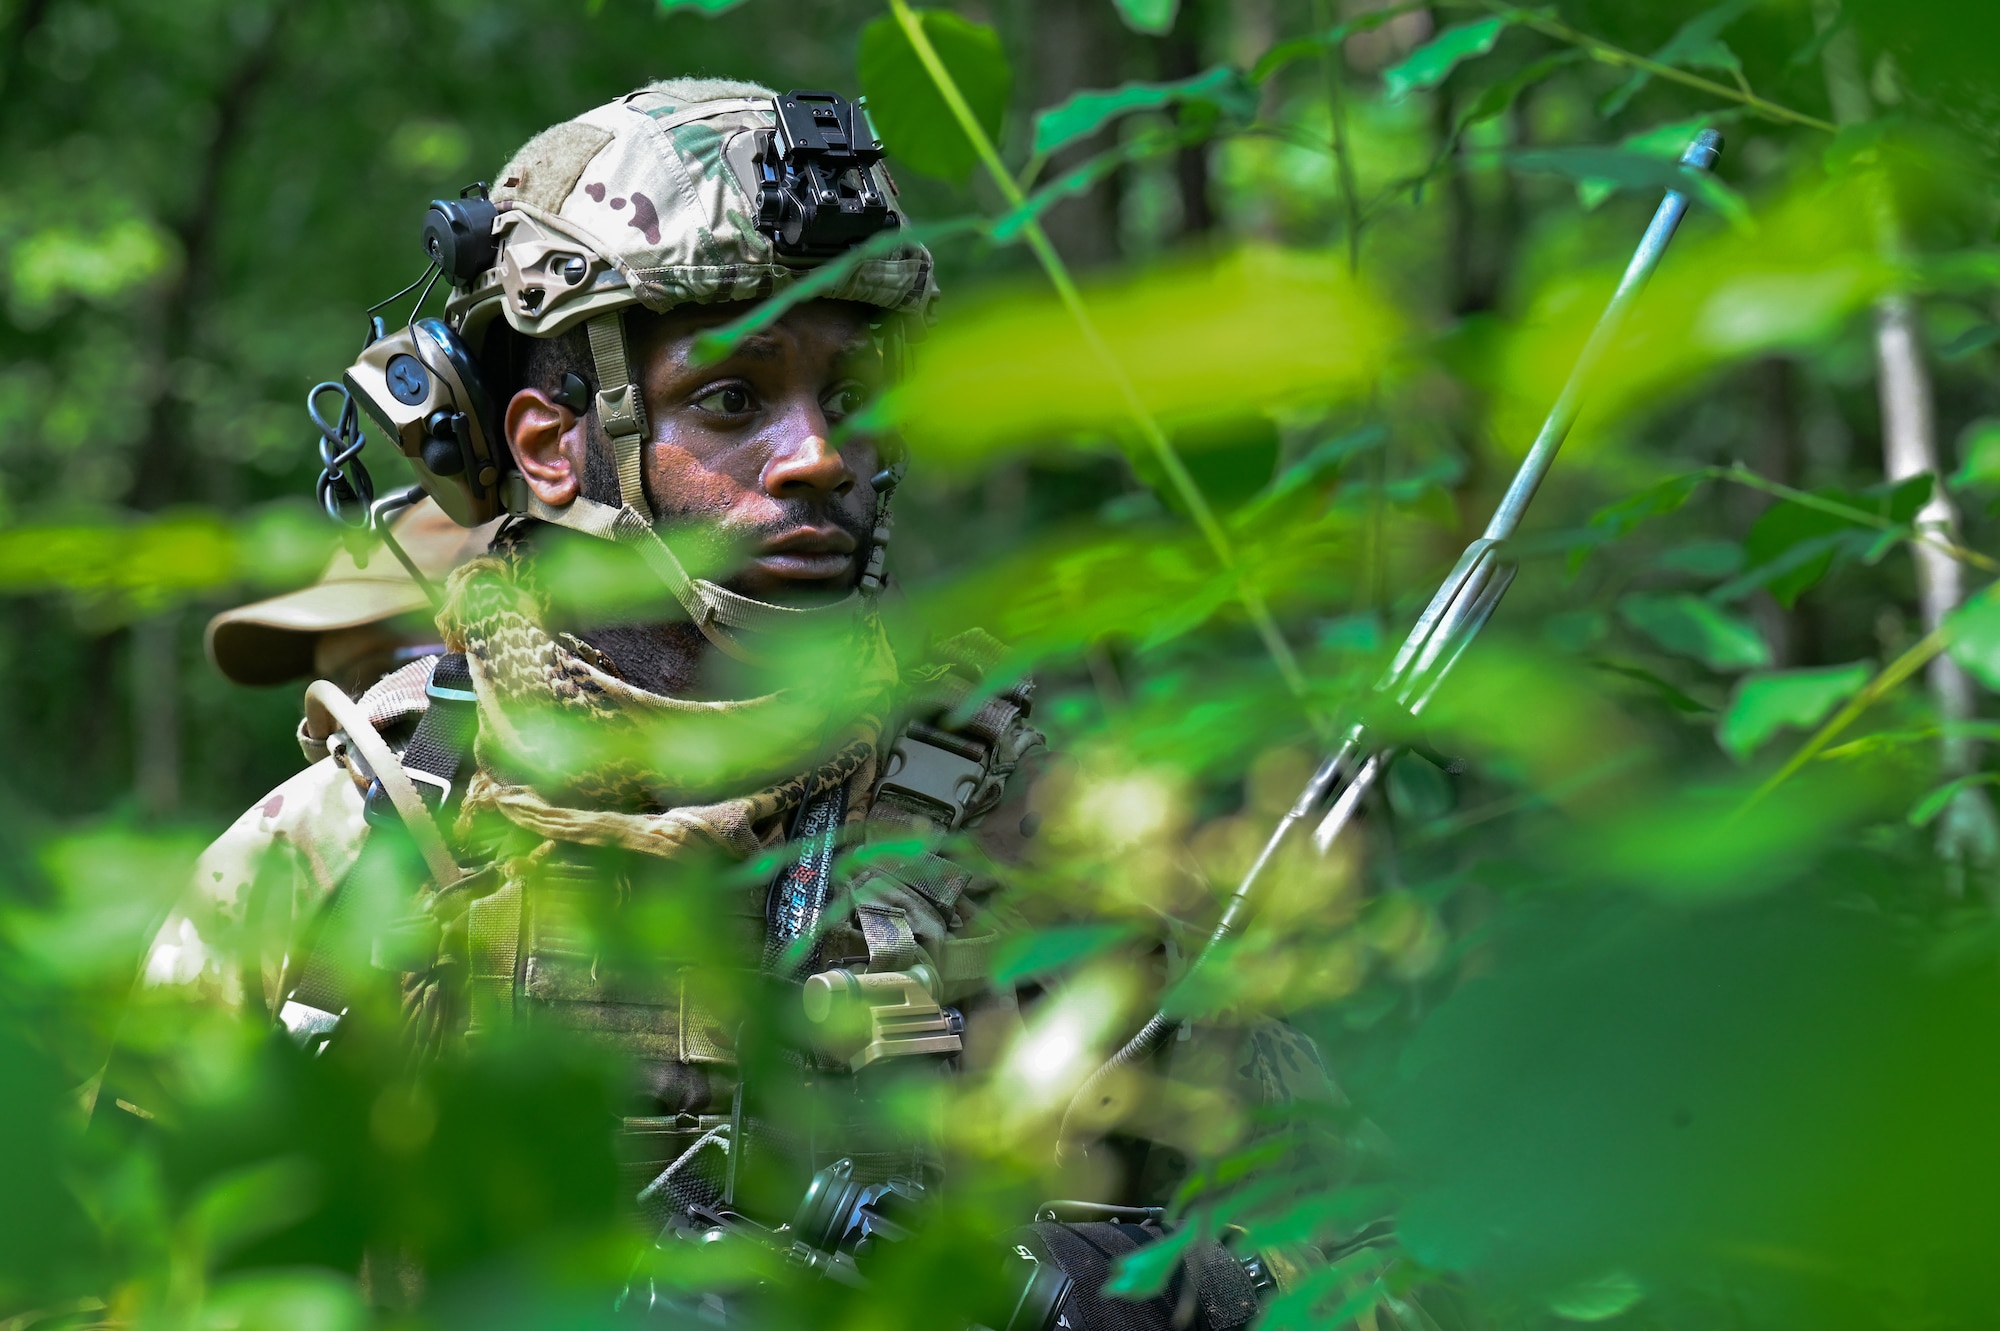 Tech. Sgt. Austin Wright, a Defender assigned to the 301st Security Forces Squadron, Carswell Field, Naval Air Station Joint Reserve Base Fort Worth, Texas, navigates his way through the woods during a training exercise on June 15, 2023, at Camp James A. Garfield Joint Military Training Center, Ohio.